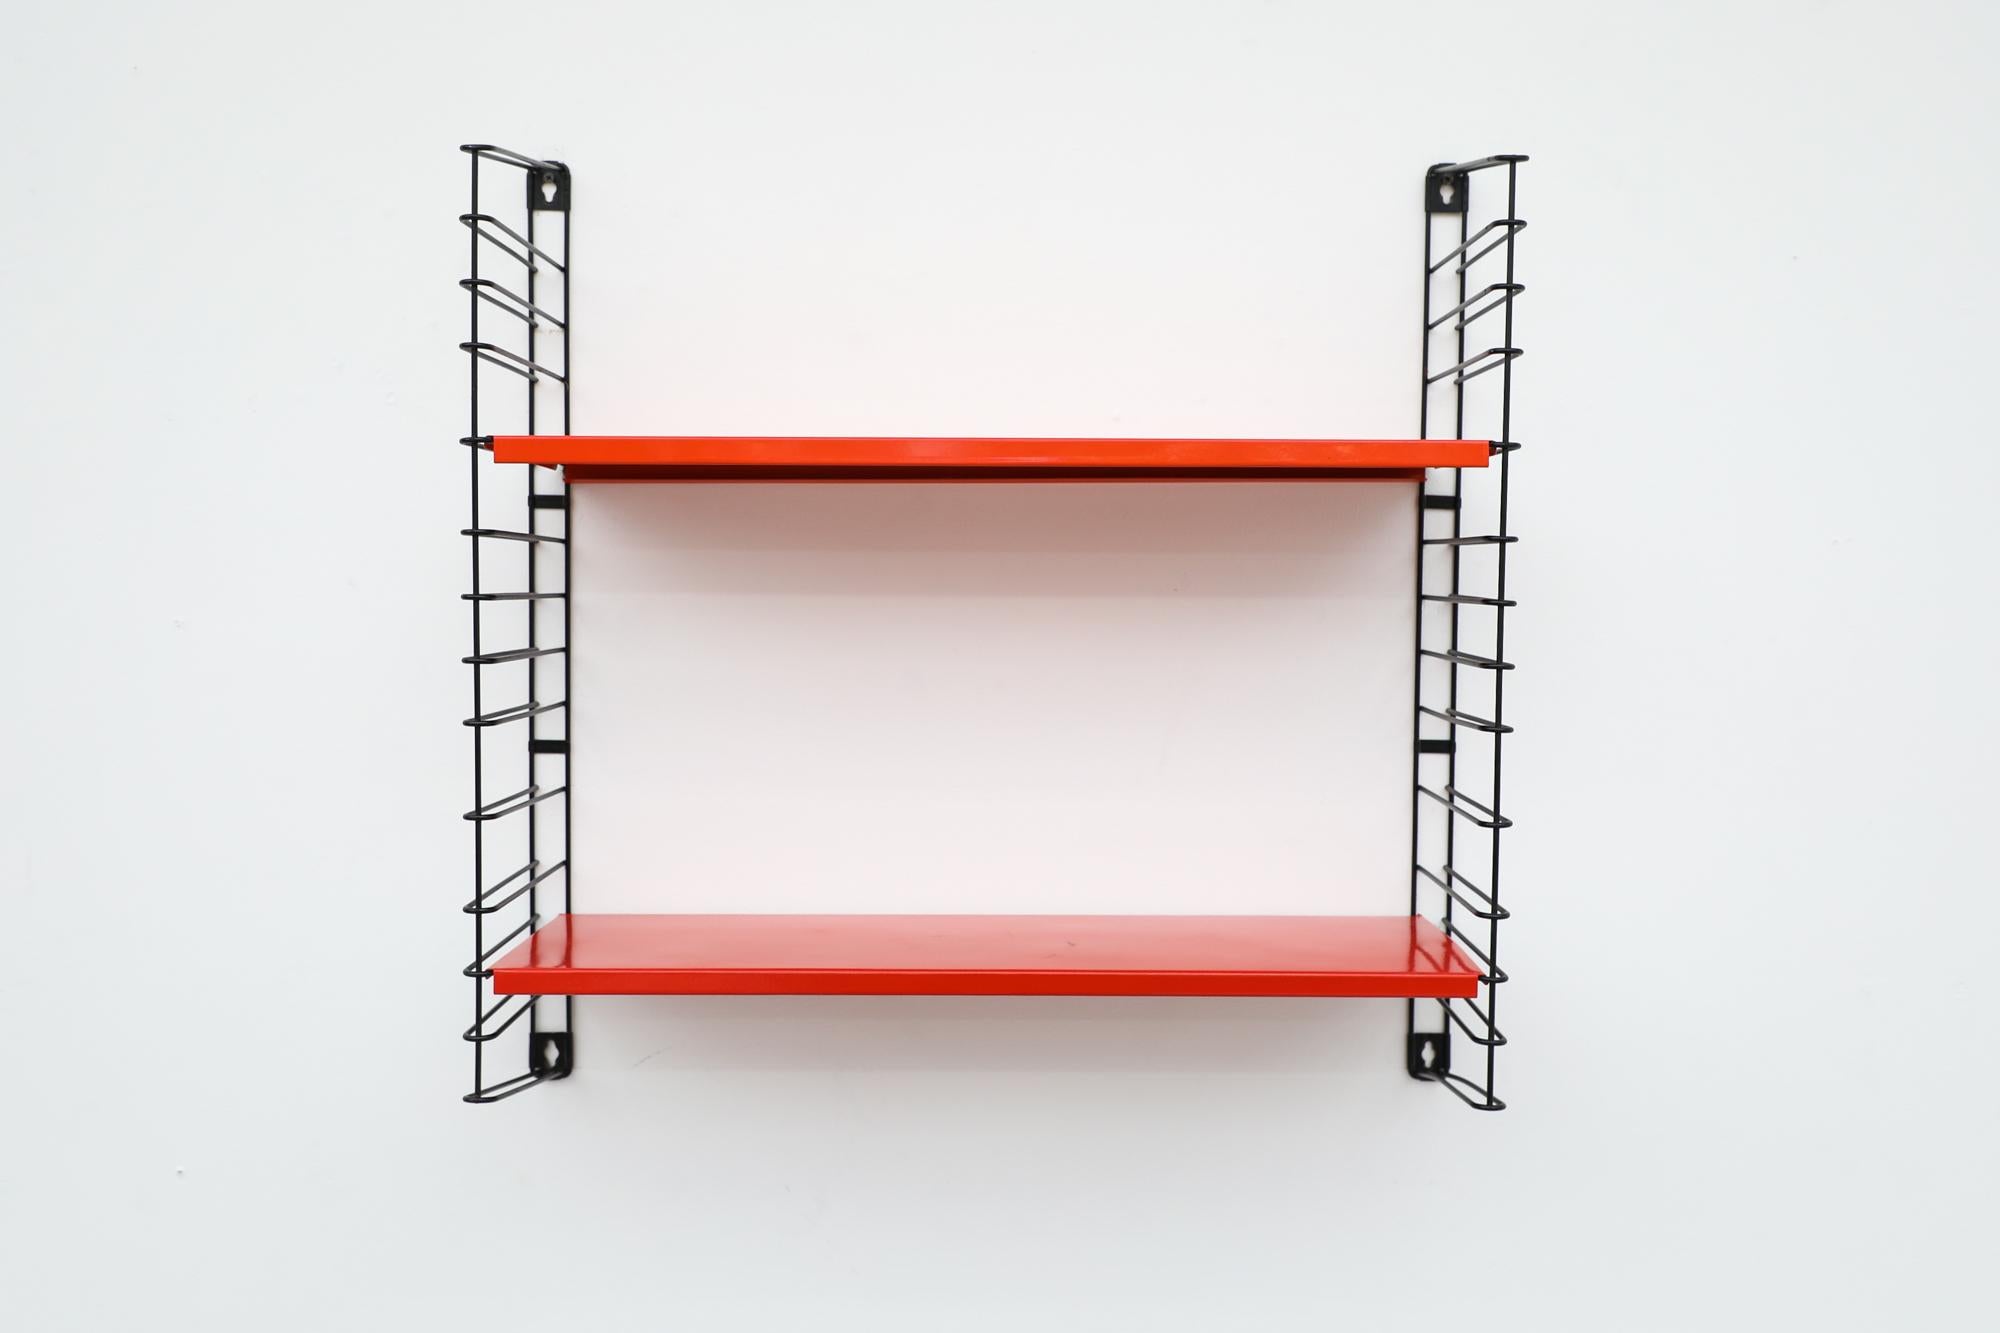 Midcentury TOMADO industrial shelving with red and orange shelves on black enameled metal wire risers. Designed by Jan van der Togt. Both shelves rest on the wire risers and can be arranged to different heights. The shelves and risers have all been